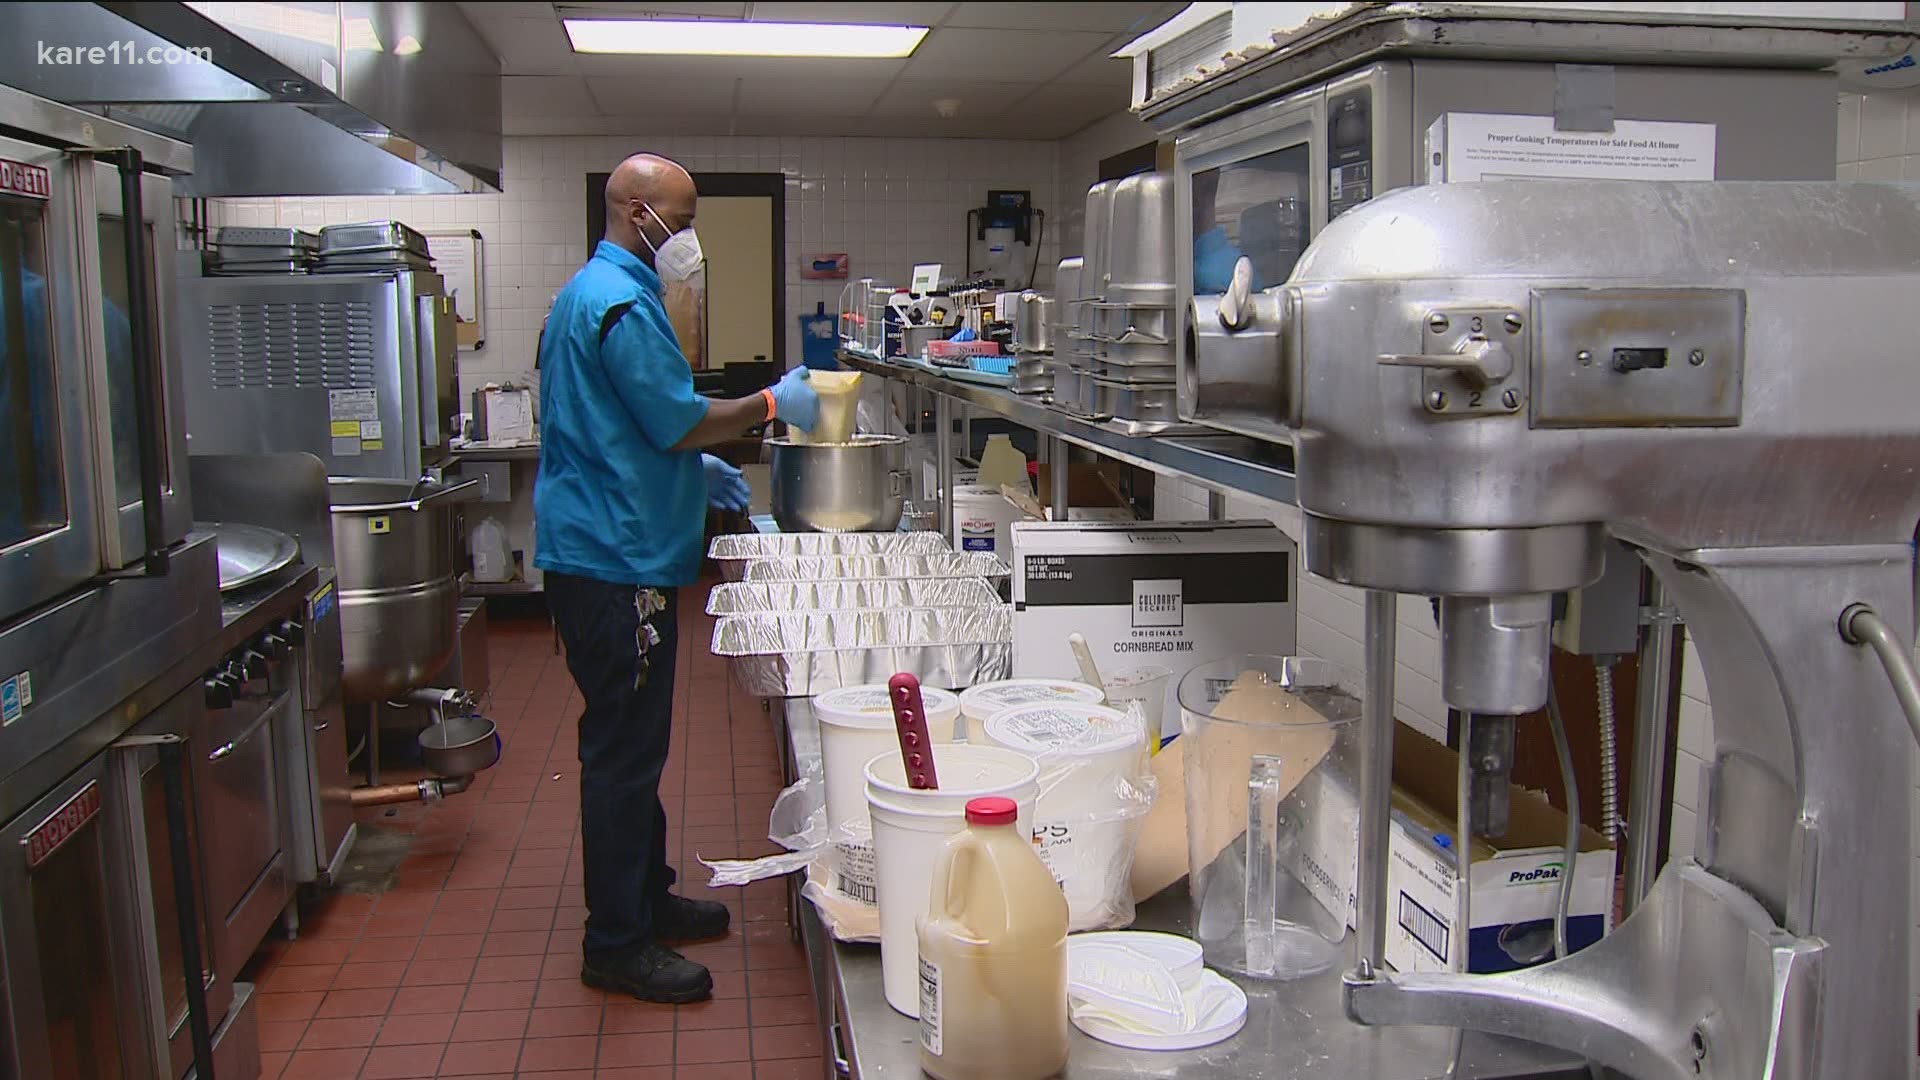 The Union Gospel Mission Twin Cities will prepare about 1,100 full-course lunches to pass out on Christmas Day.